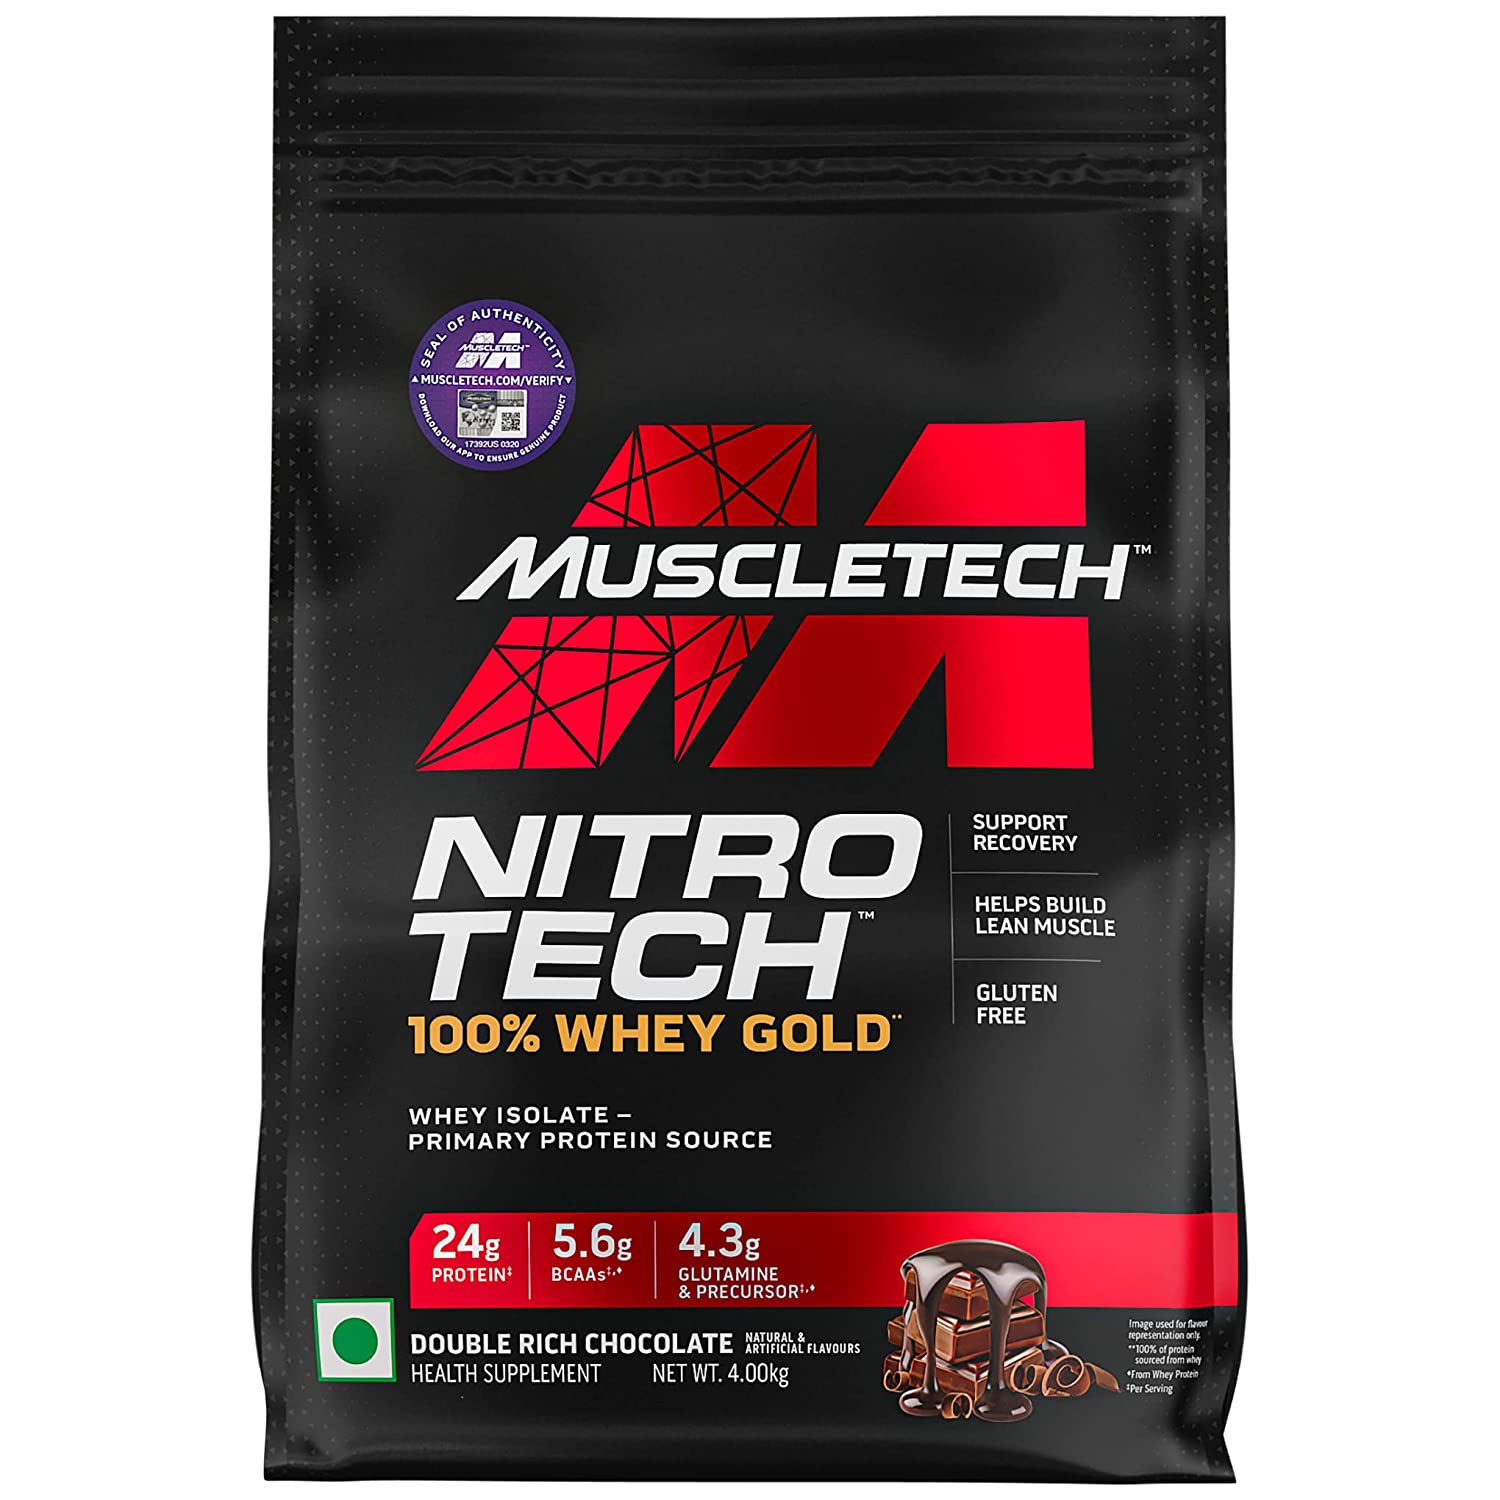 MuscleTech Nitrotech 100% Whey Gold Protein Powder Whey Isolate Primary Protein